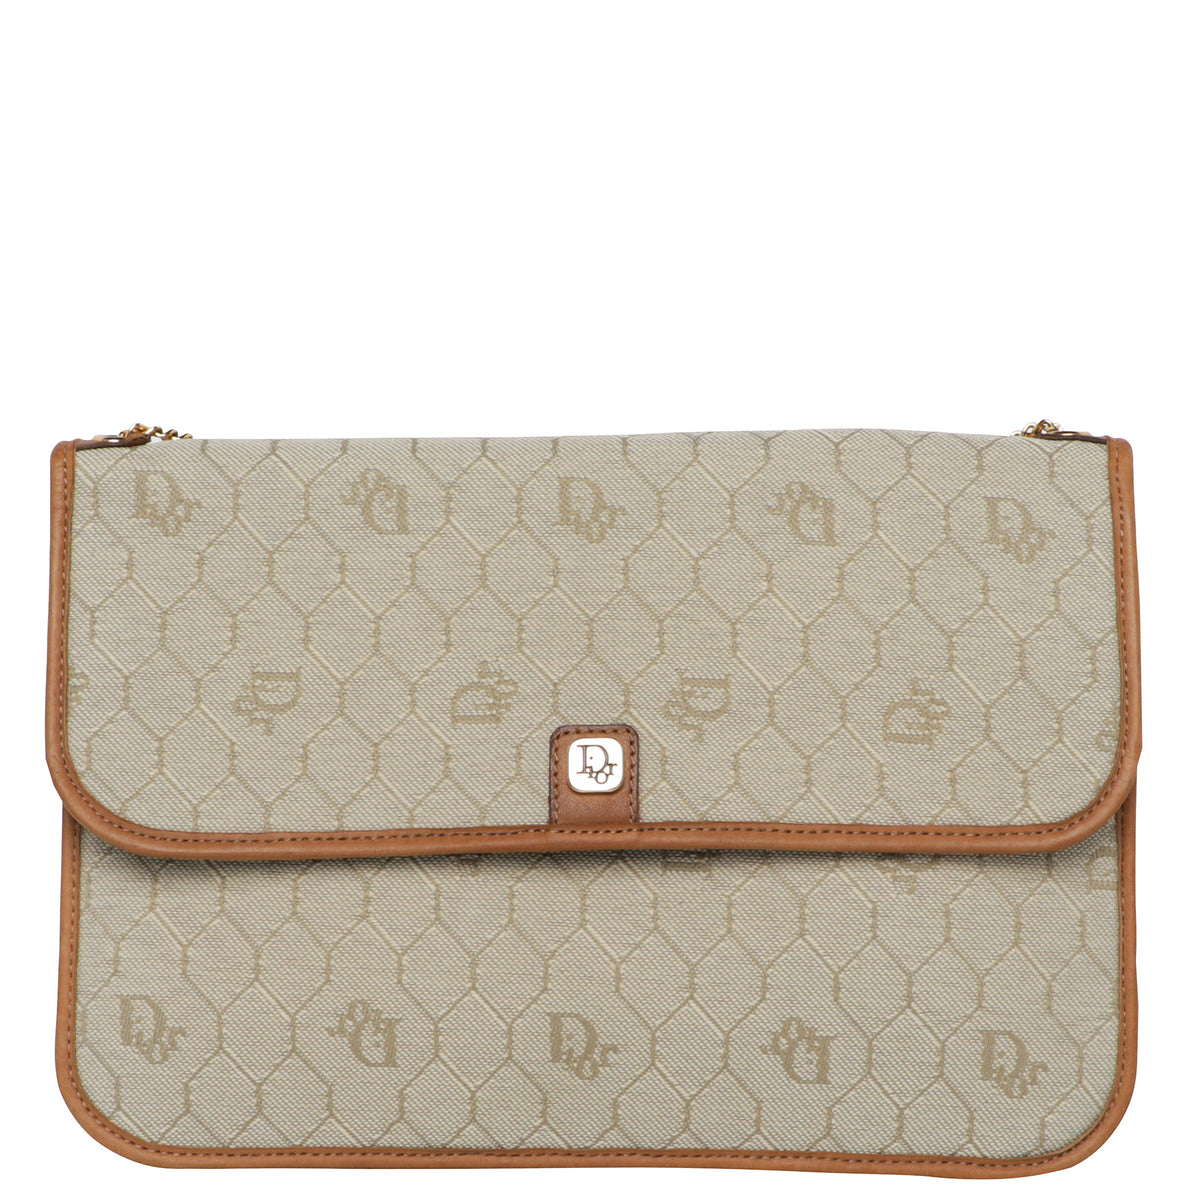 Louis Vuitton by The French Company-Monogram Clutch Bag-Vintage-Early  1980's